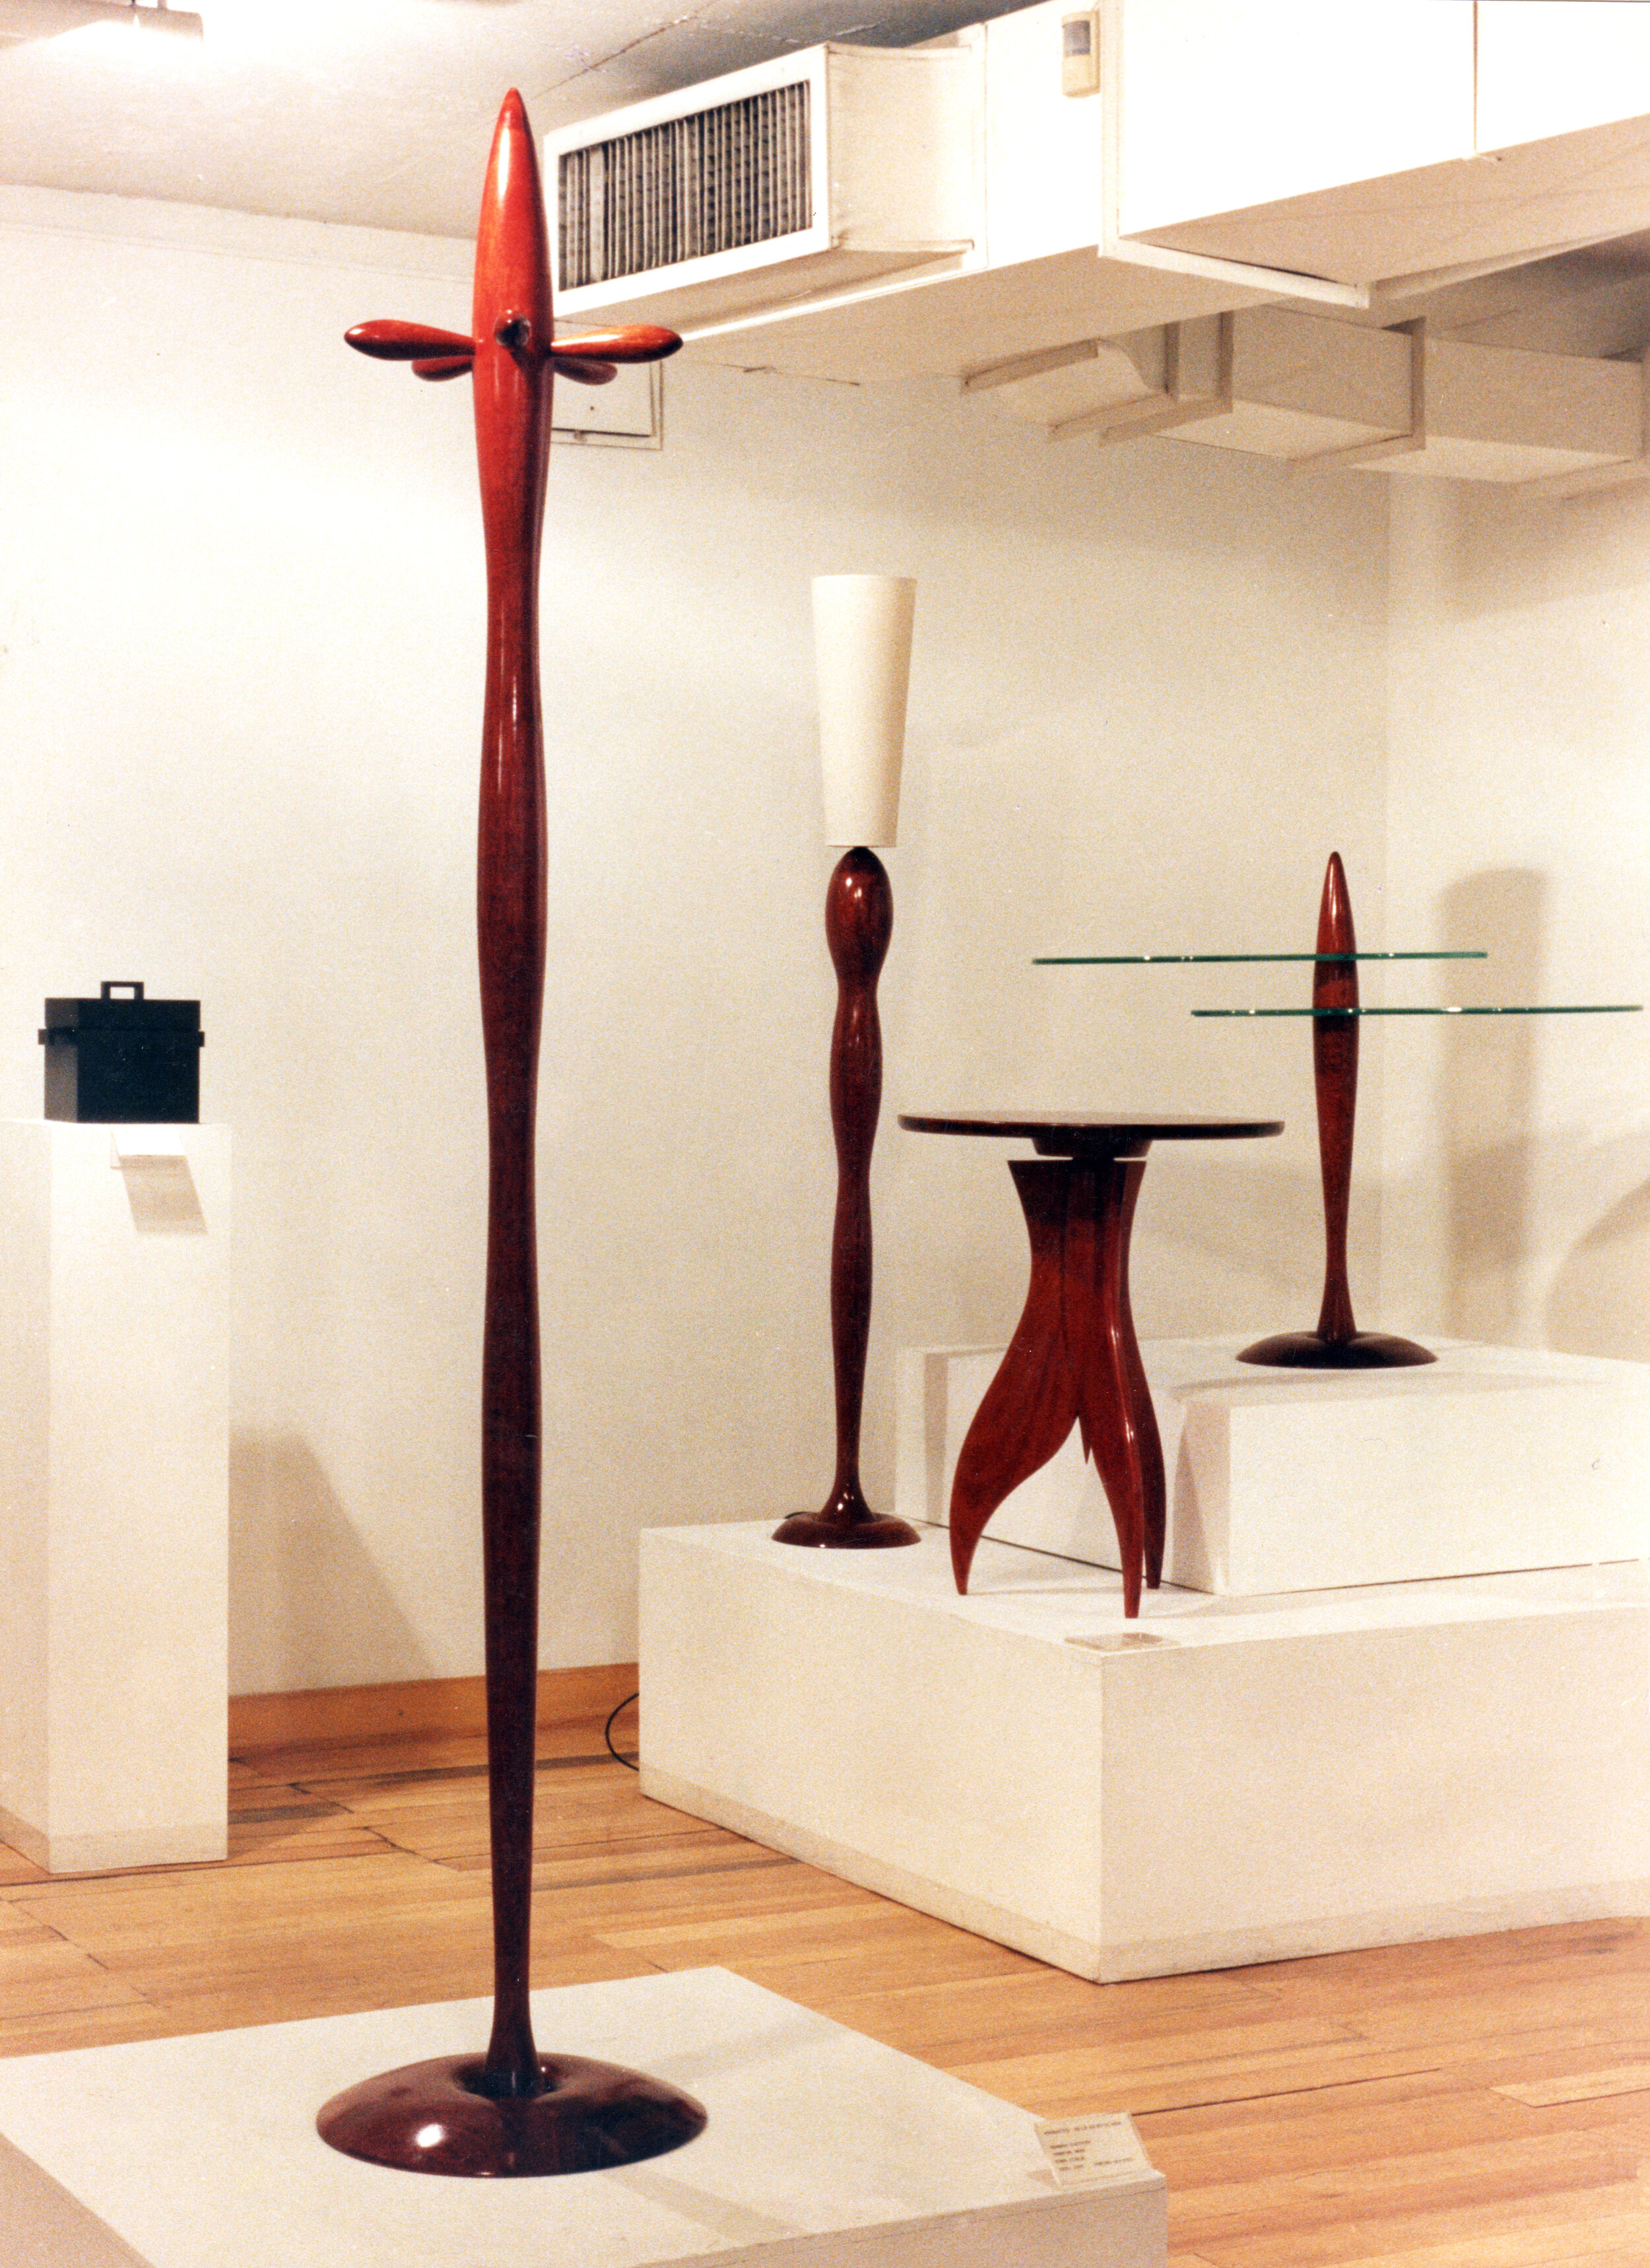 Irrational Design Exhibition  |  Ruth Benzacar gallery  |  Buenos Aires 1992